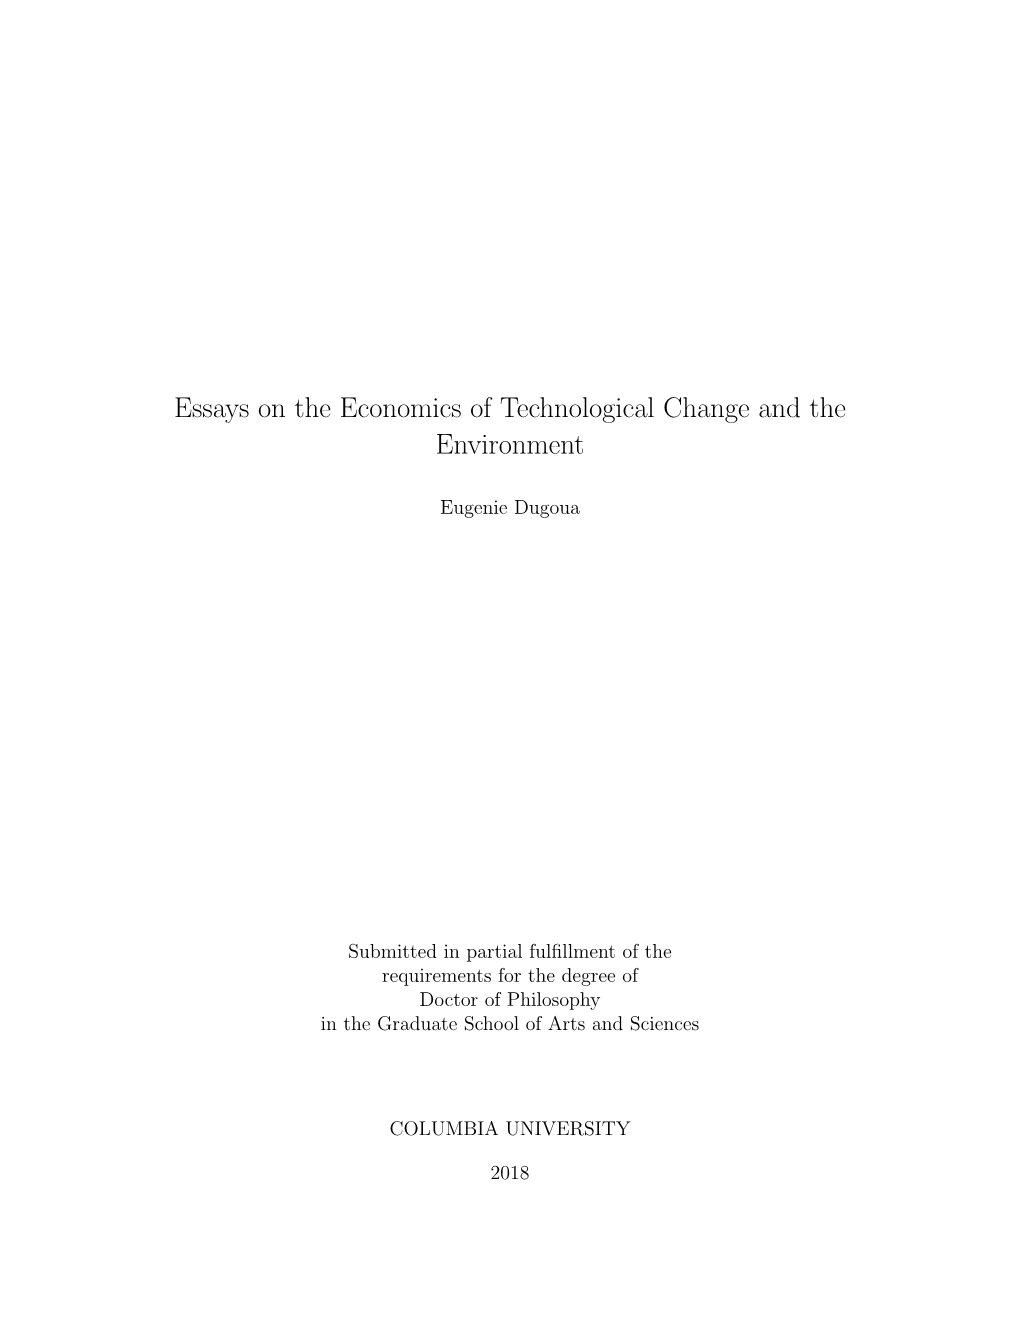 Essays on the Economics of Technological Change and the Environment